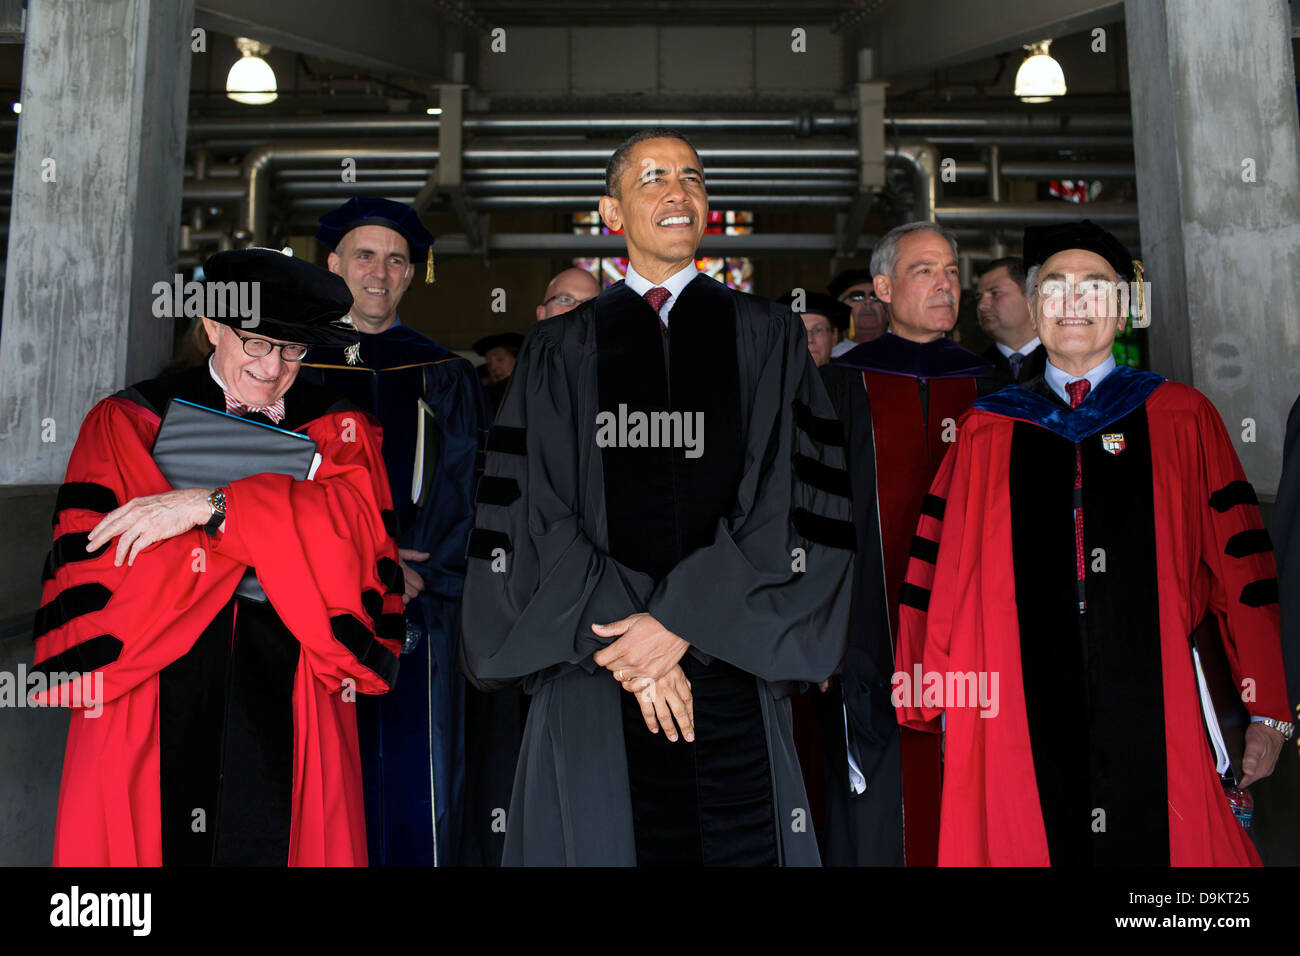 US President Barack Obama joins The Ohio State University President E. Gordon Gee, left, and others before the start of commencement at Ohio Stadium May 5, 2013 in Columbus, Ohio. Stock Photo